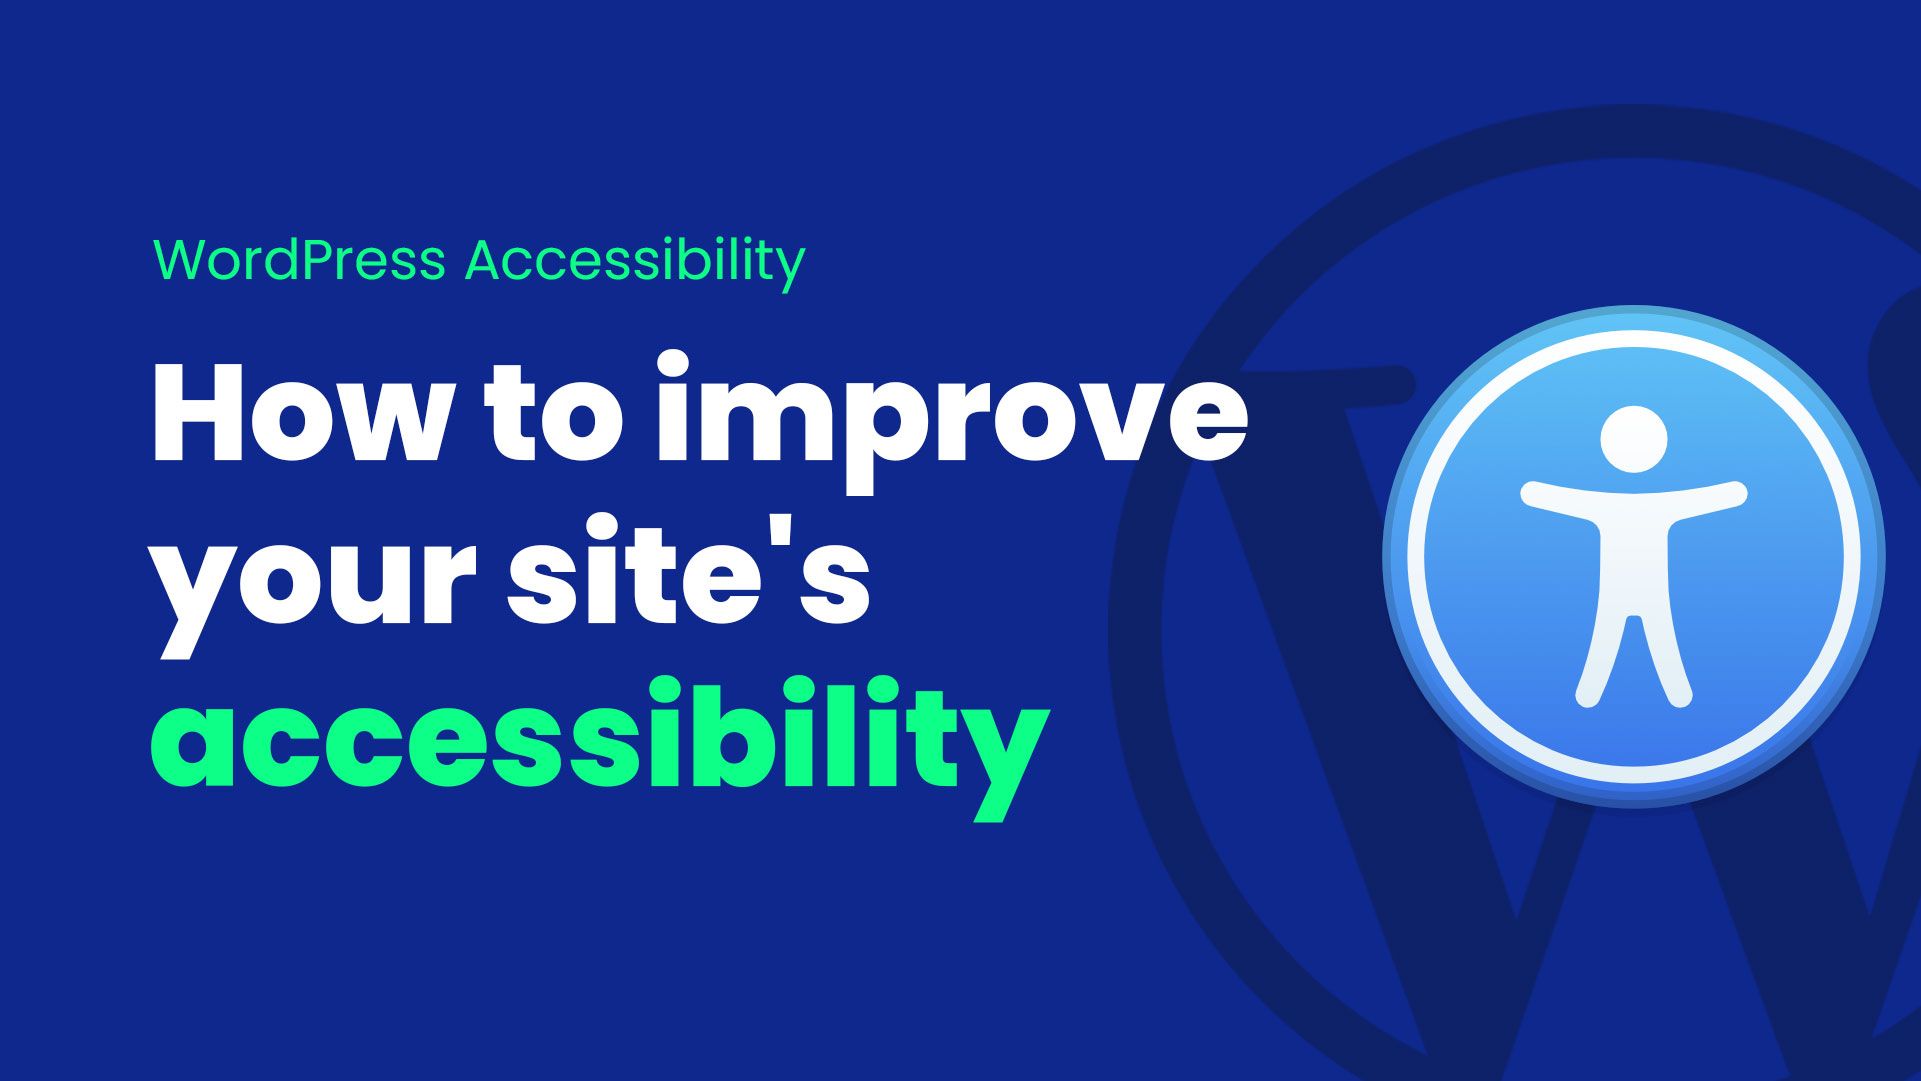 How to make your WordPress website more accessible?